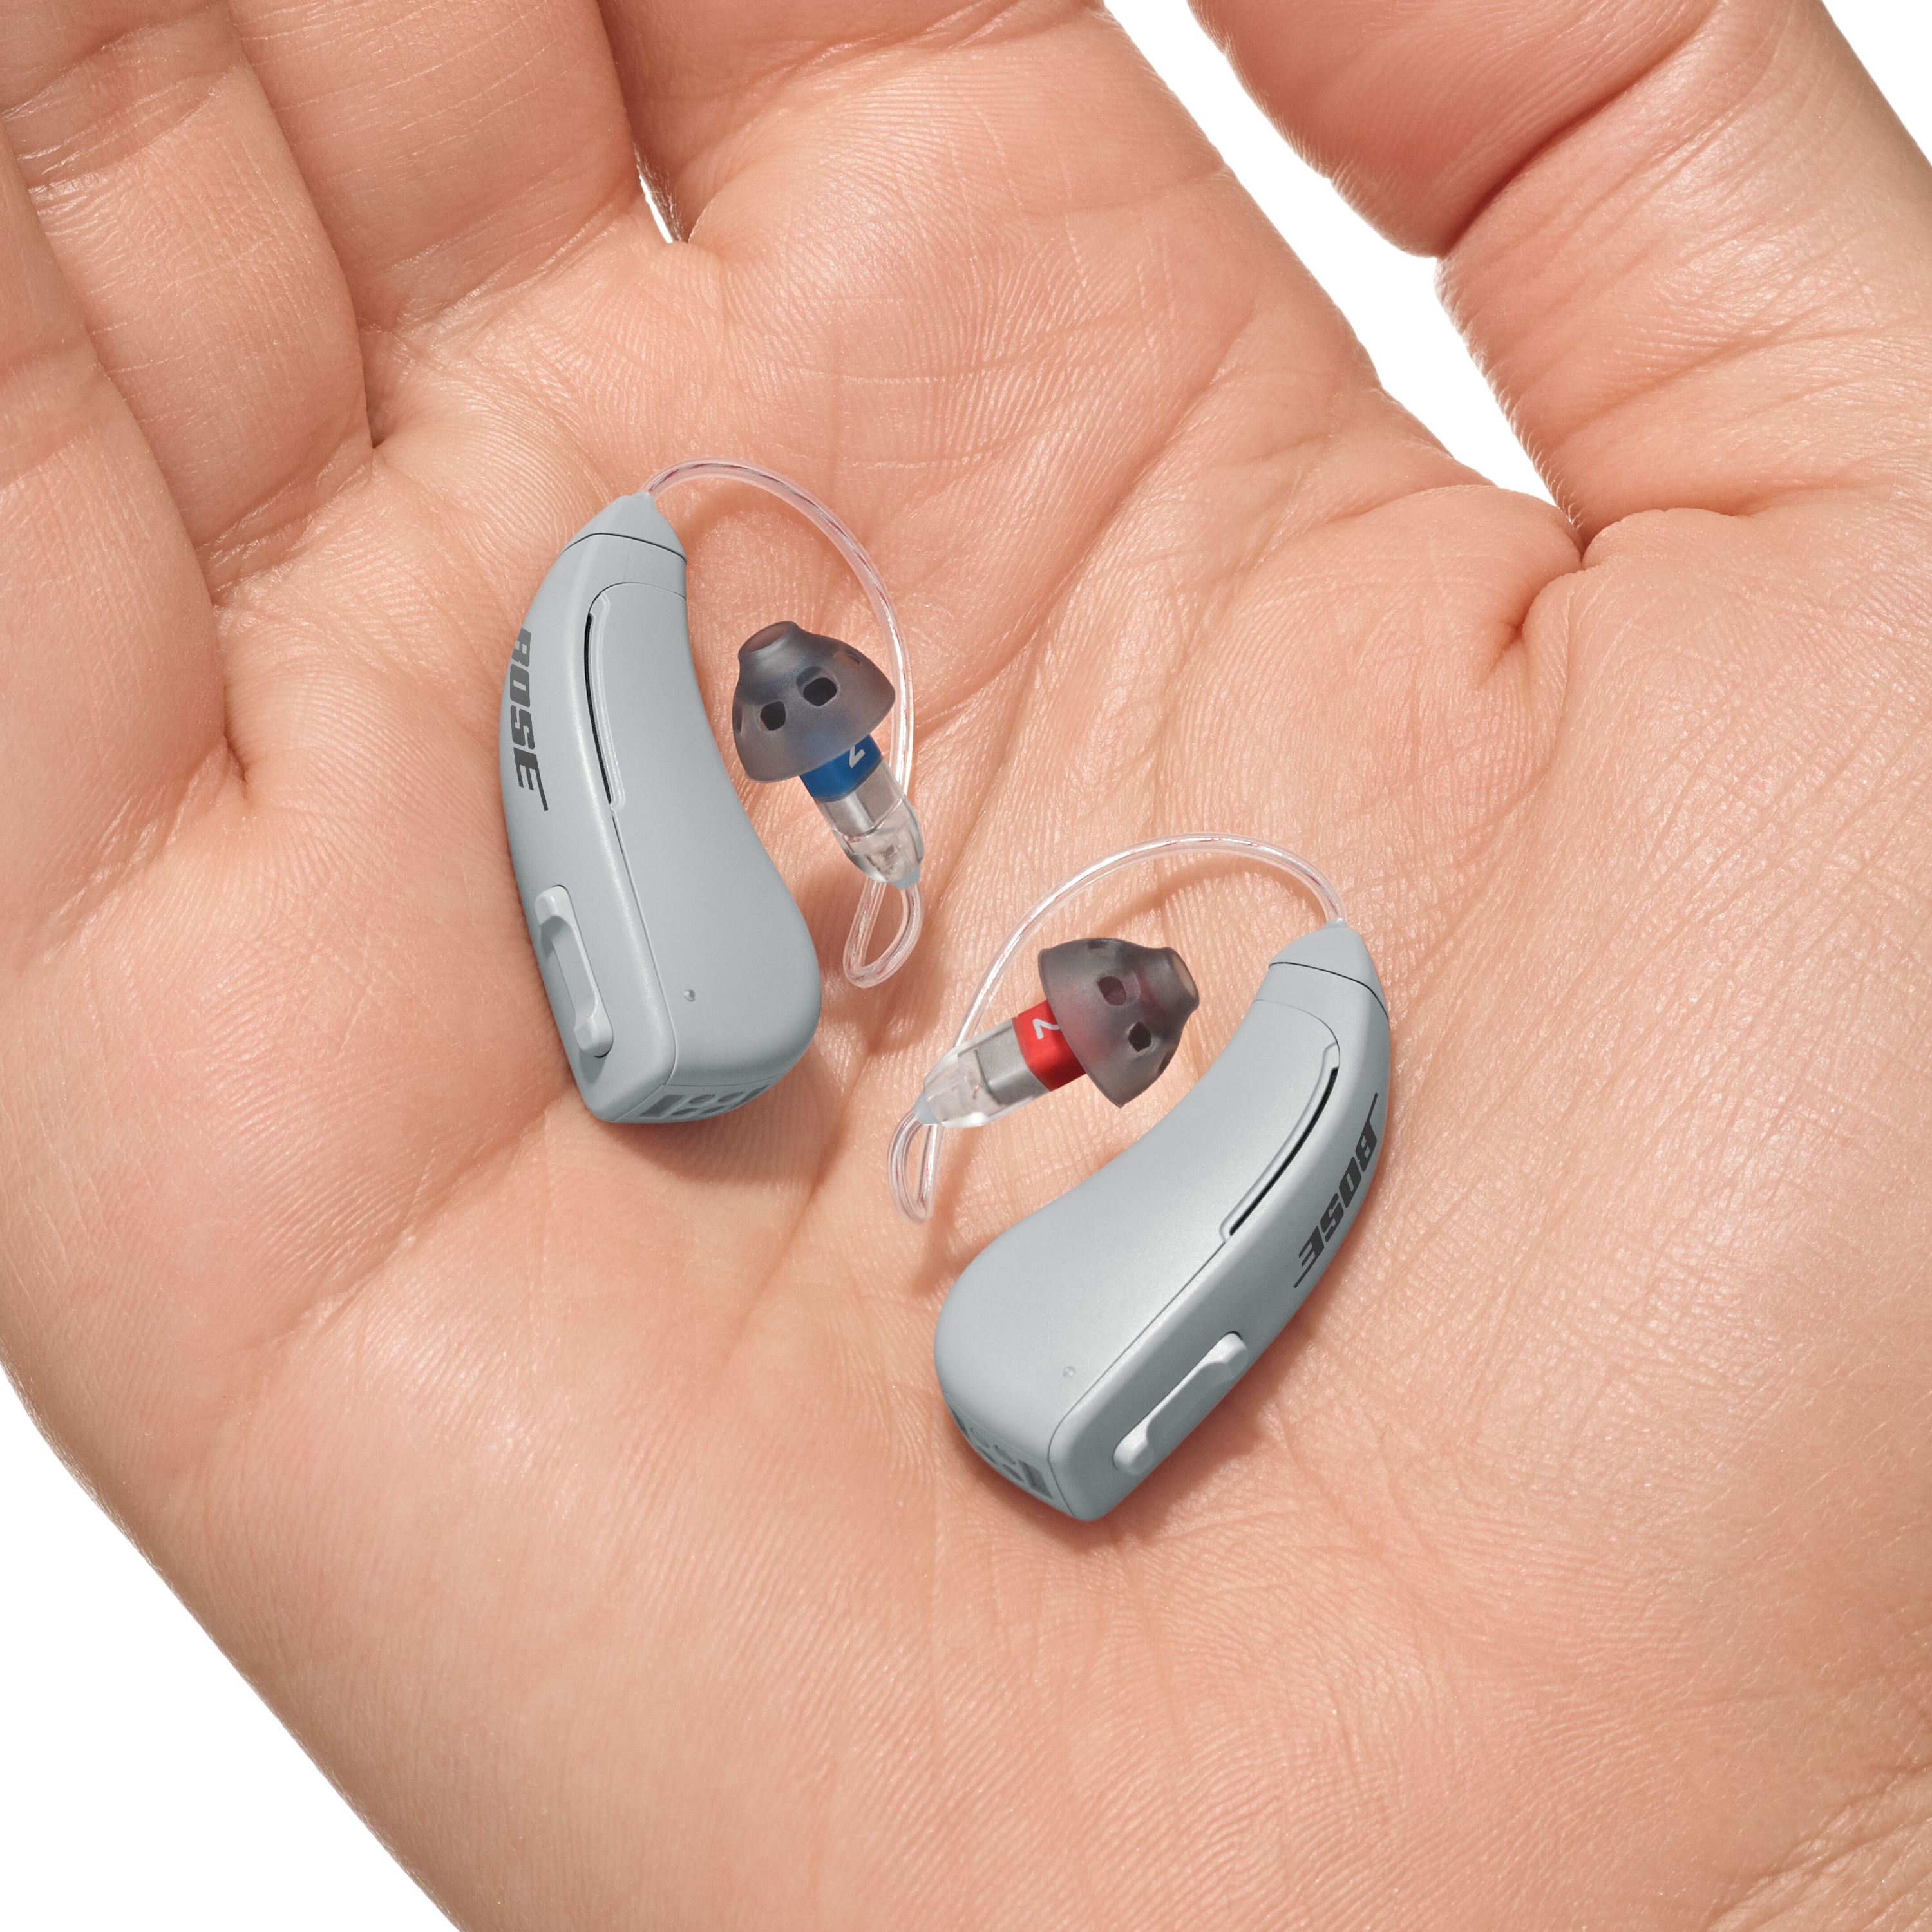 Lexie B2 Self-fitting OTC Hearing Aids Powered by Bose - image 7 of 16